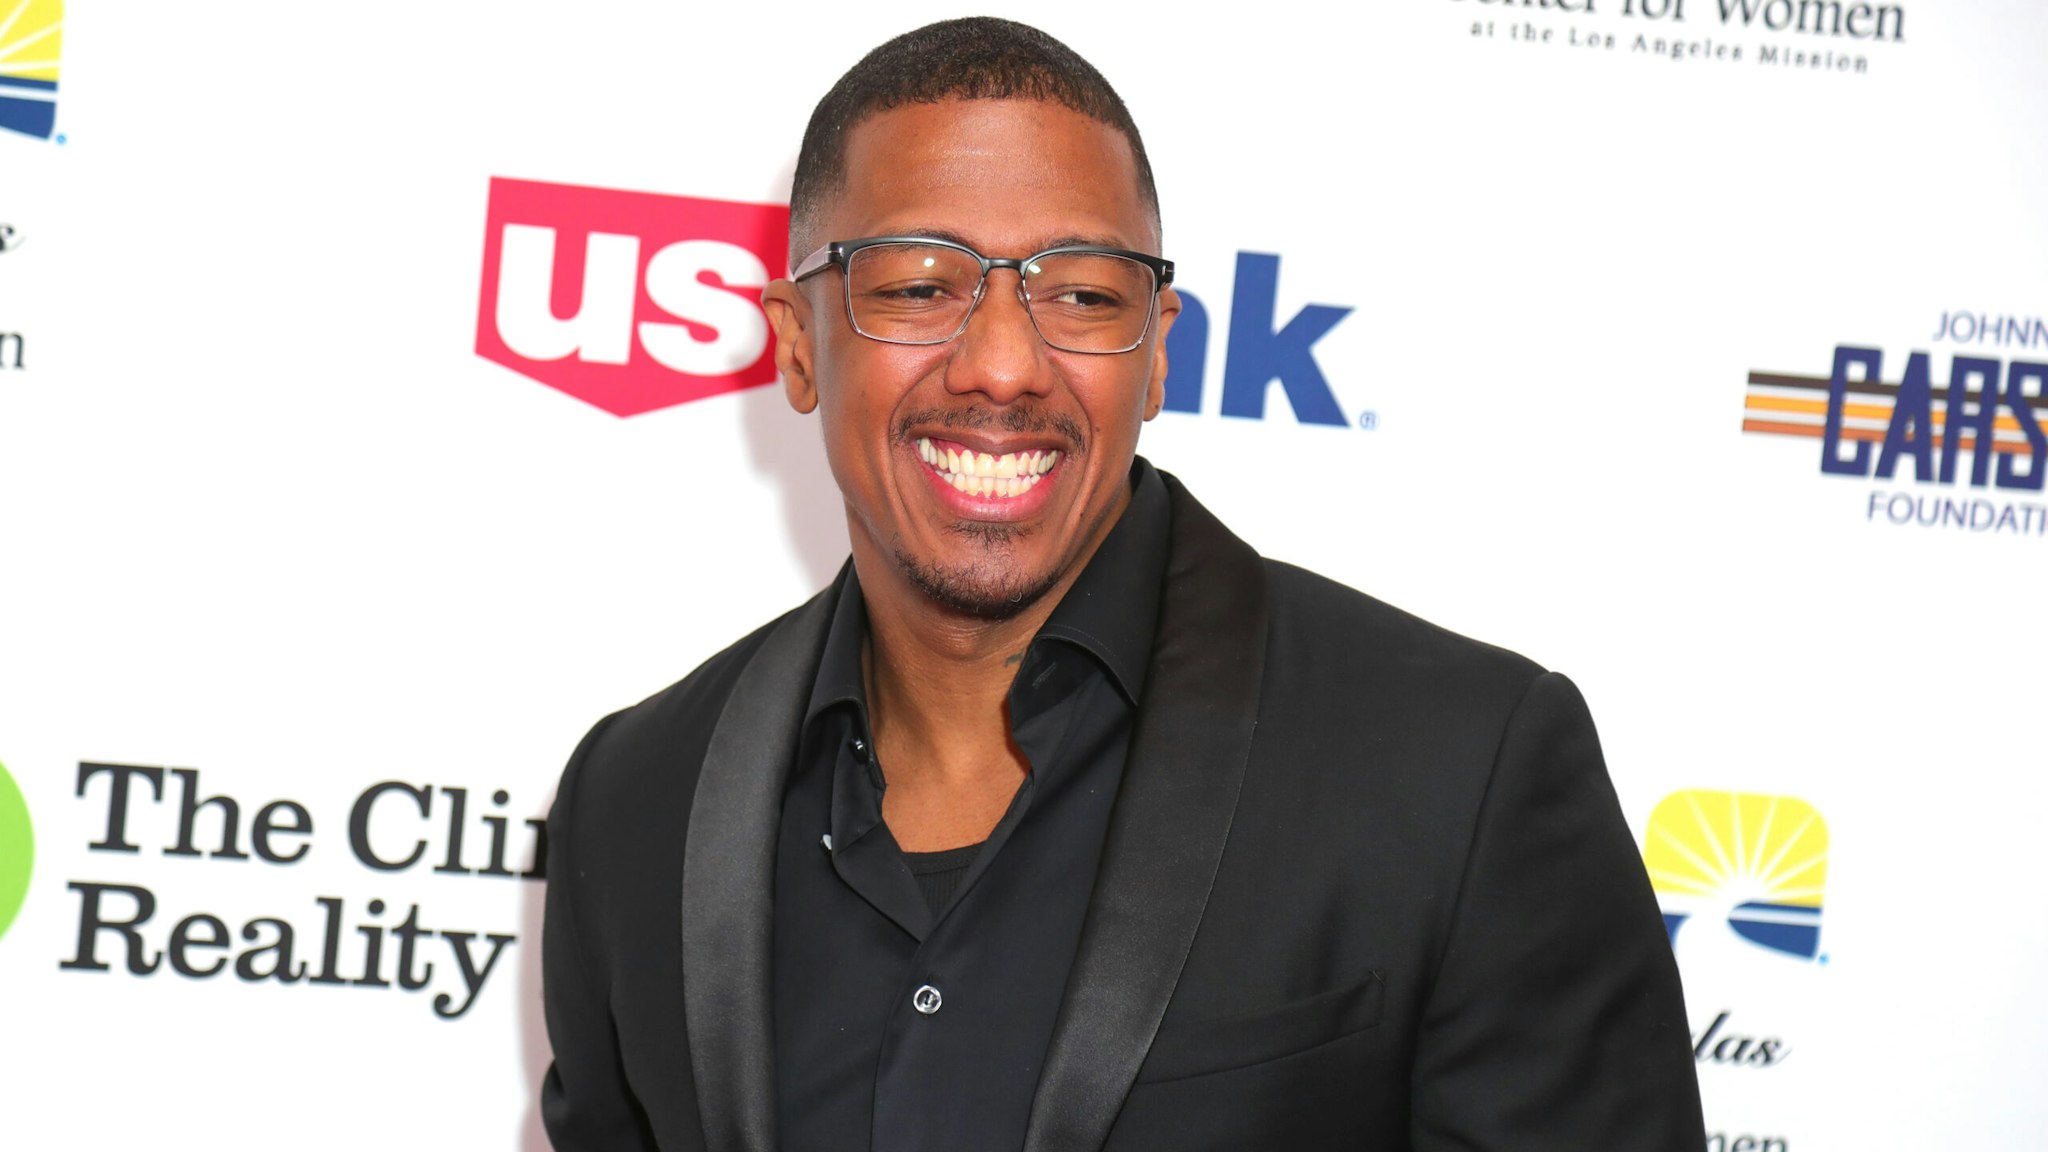 BEVERLY HILLS, CALIFORNIA - OCTOBER 24: Nick Cannon attends The Los Angeles Mission Legacy Of Vision Gala at The Beverly Hilton Hotel on October 24, 2019 in Beverly Hills, California.